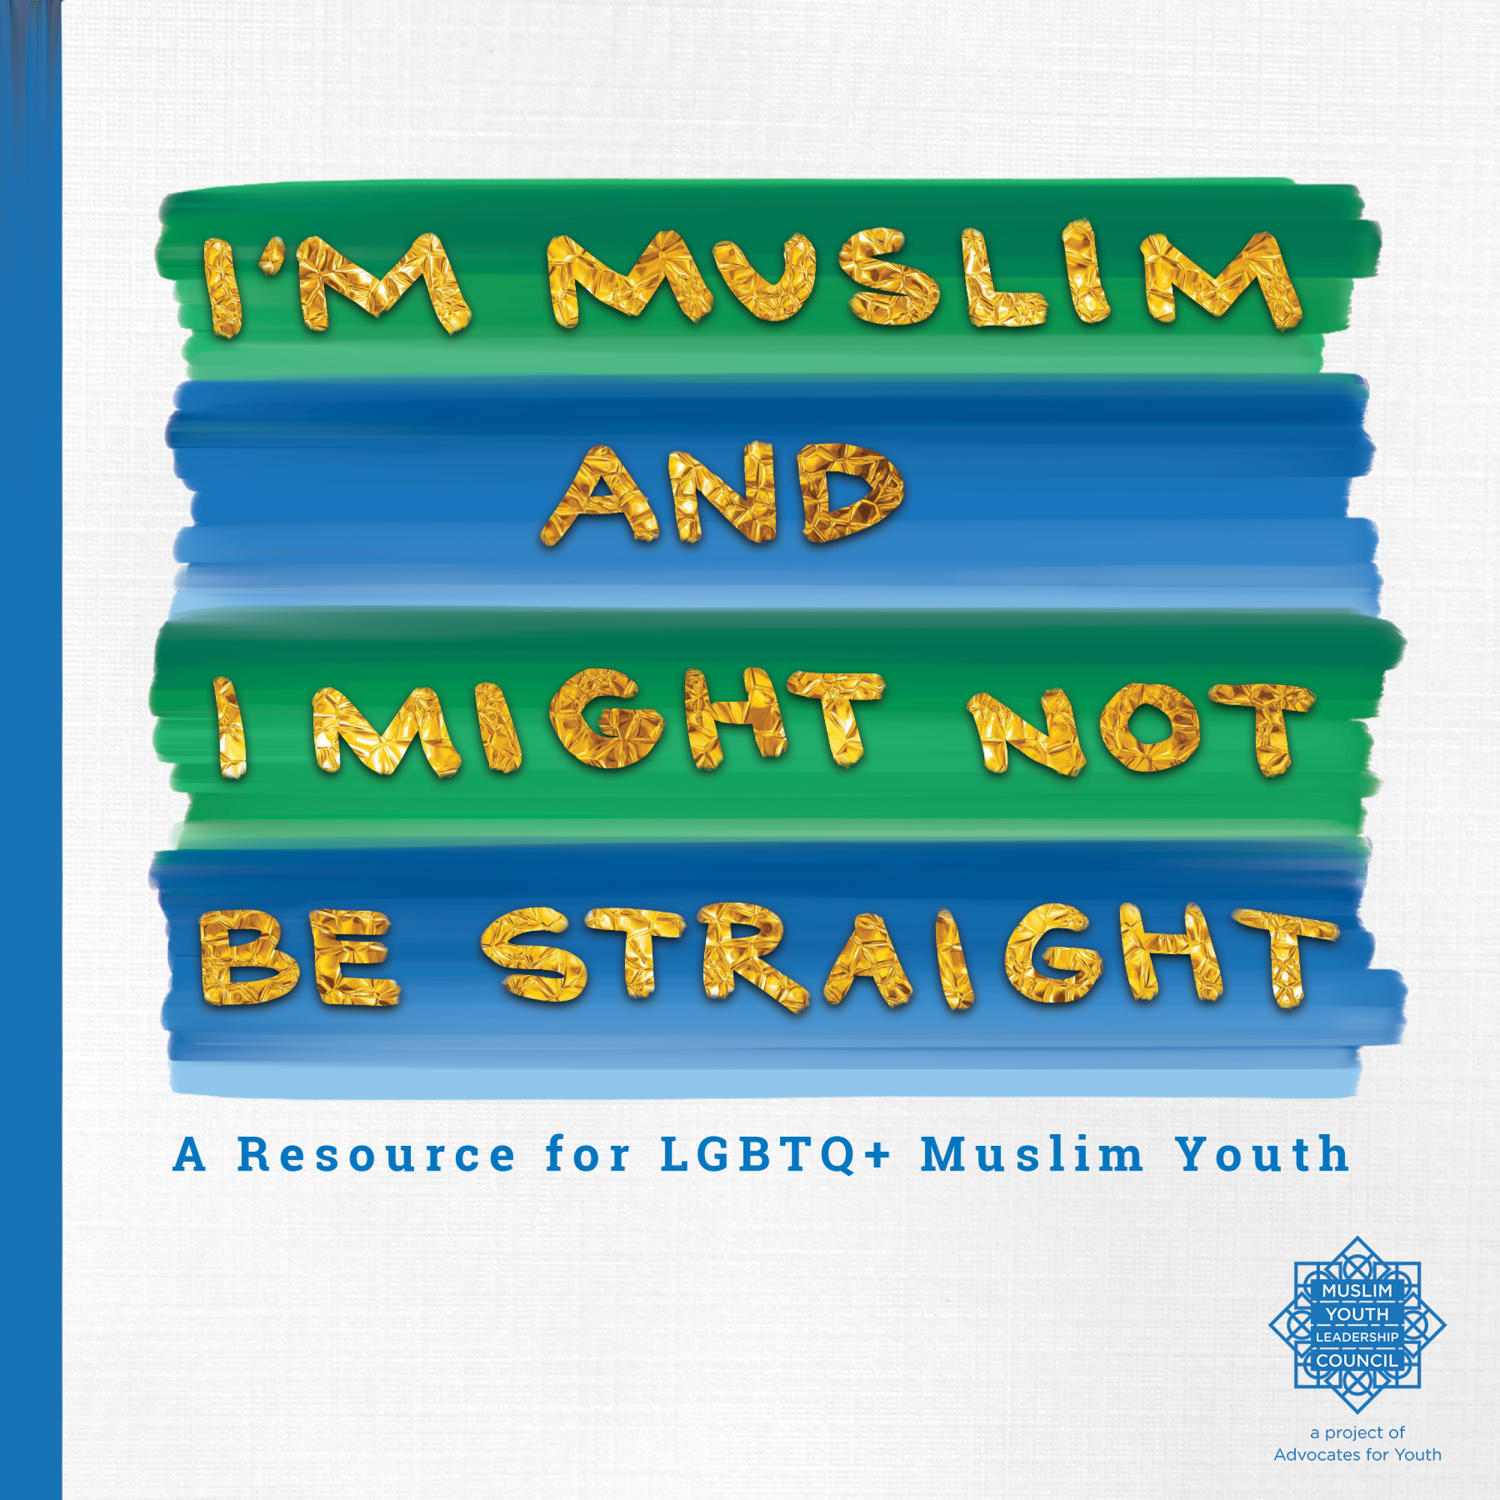 New guide aims to help LGBTQ Muslims find community